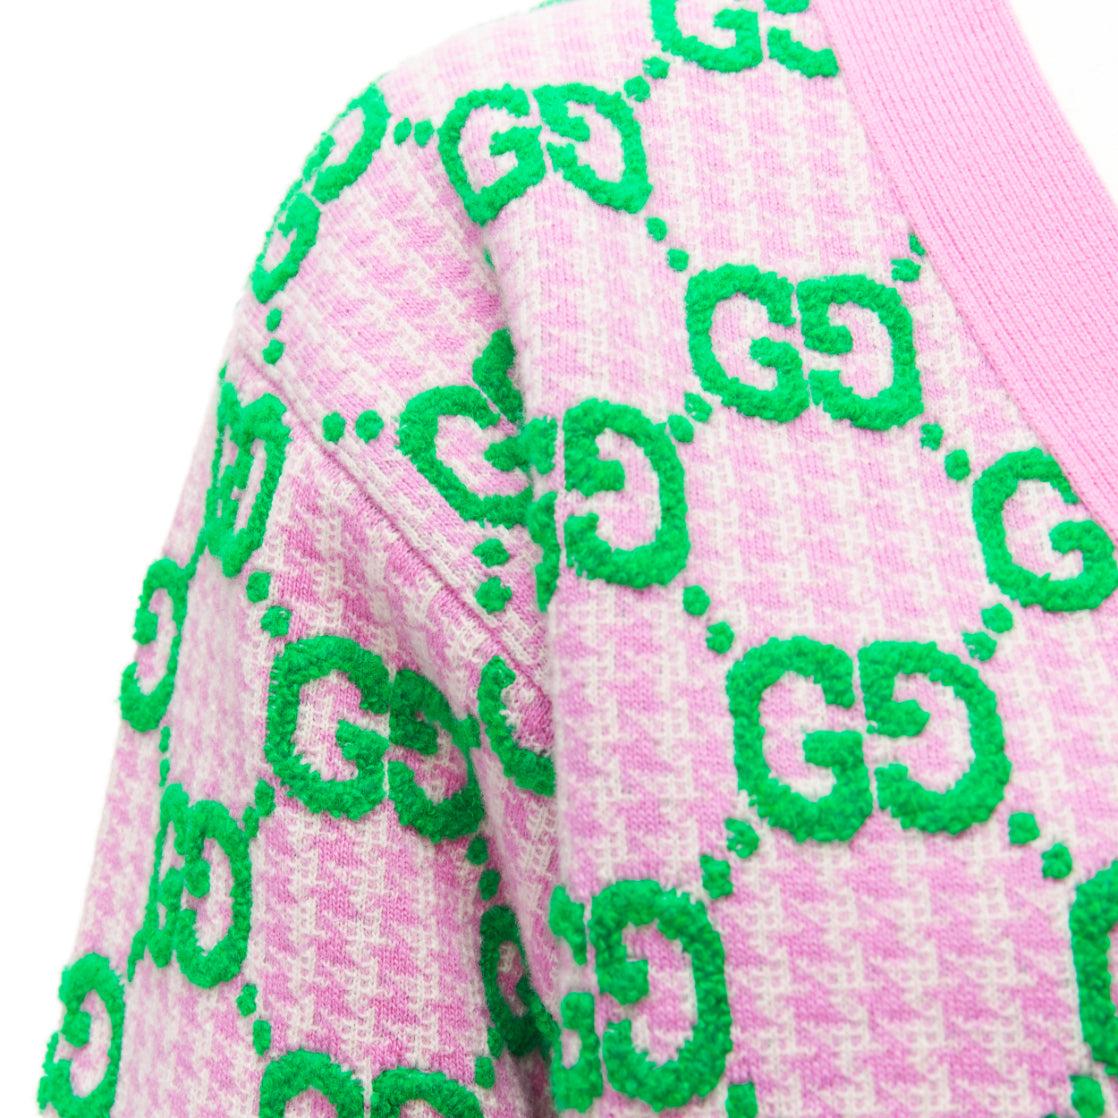 GUCCI 2023 wool pink green GG monogram jacquard oversized cardigan sweater XS
Reference: AAWC/A00623
Brand: Gucci
Collection: 2023 SS
Material: 100% Wool
Color: Pink, Green
Pattern: Monogram
Closure: Button
Extra Details: Mother of pearl buttons.